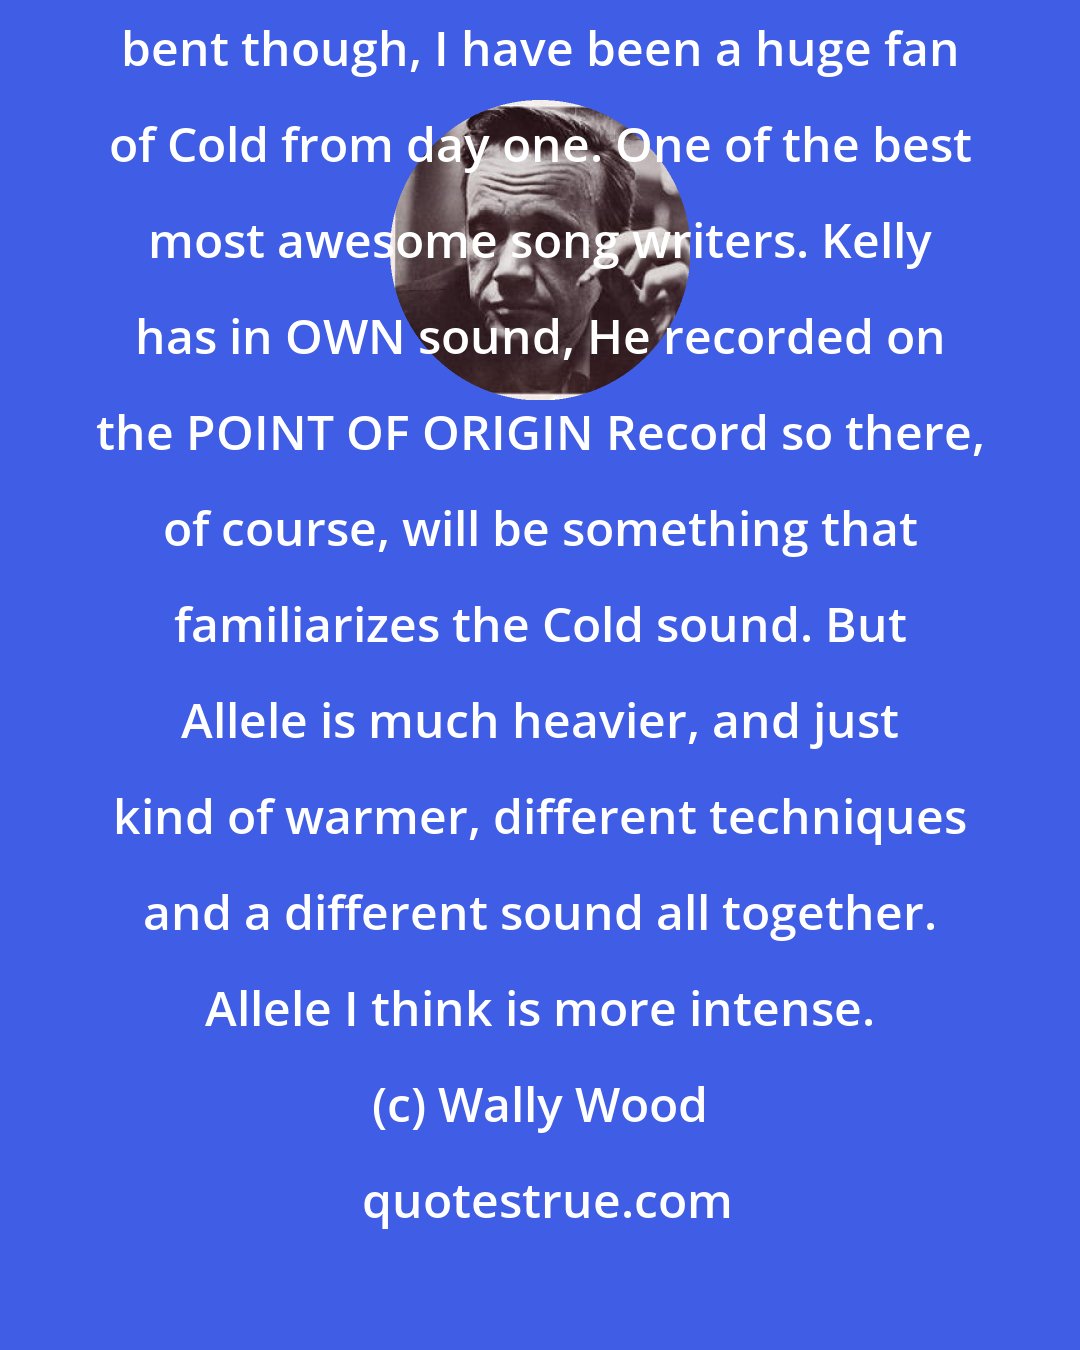 Wally Wood: I would INSIST this record is in NO WAY COLD influenced. Don't get me bent though, I have been a huge fan of Cold from day one. One of the best most awesome song writers. Kelly has in OWN sound, He recorded on the POINT OF ORIGIN Record so there, of course, will be something that familiarizes the Cold sound. But Allele is much heavier, and just kind of warmer, different techniques and a different sound all together. Allele I think is more intense.